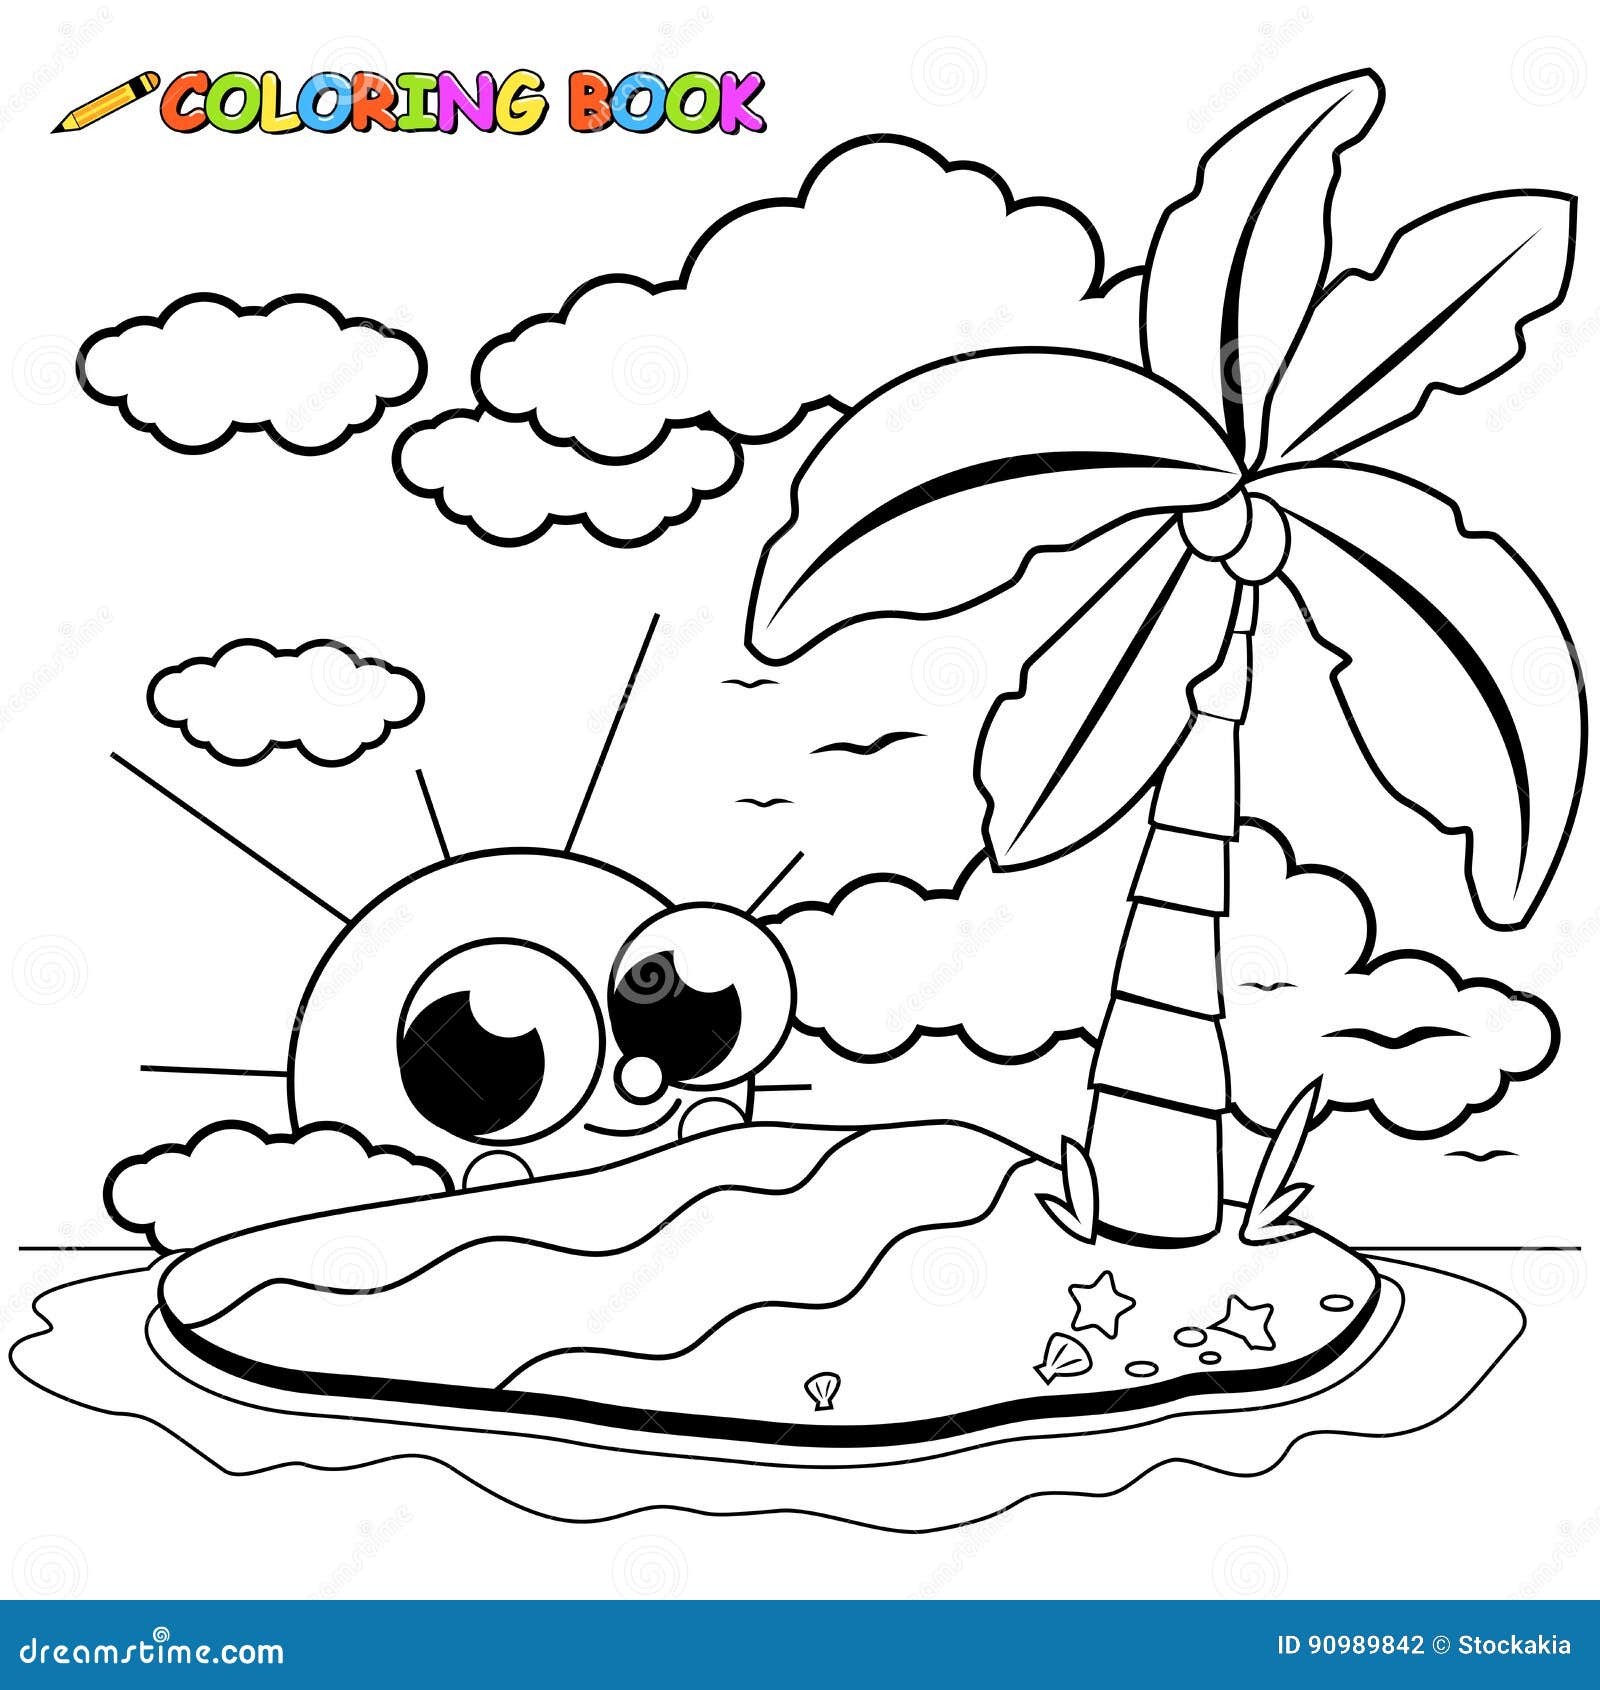 Island Coloring Page Stock Illustrations 442 Island Coloring Page Stock Illustrations Vectors Clipart Dreamstime